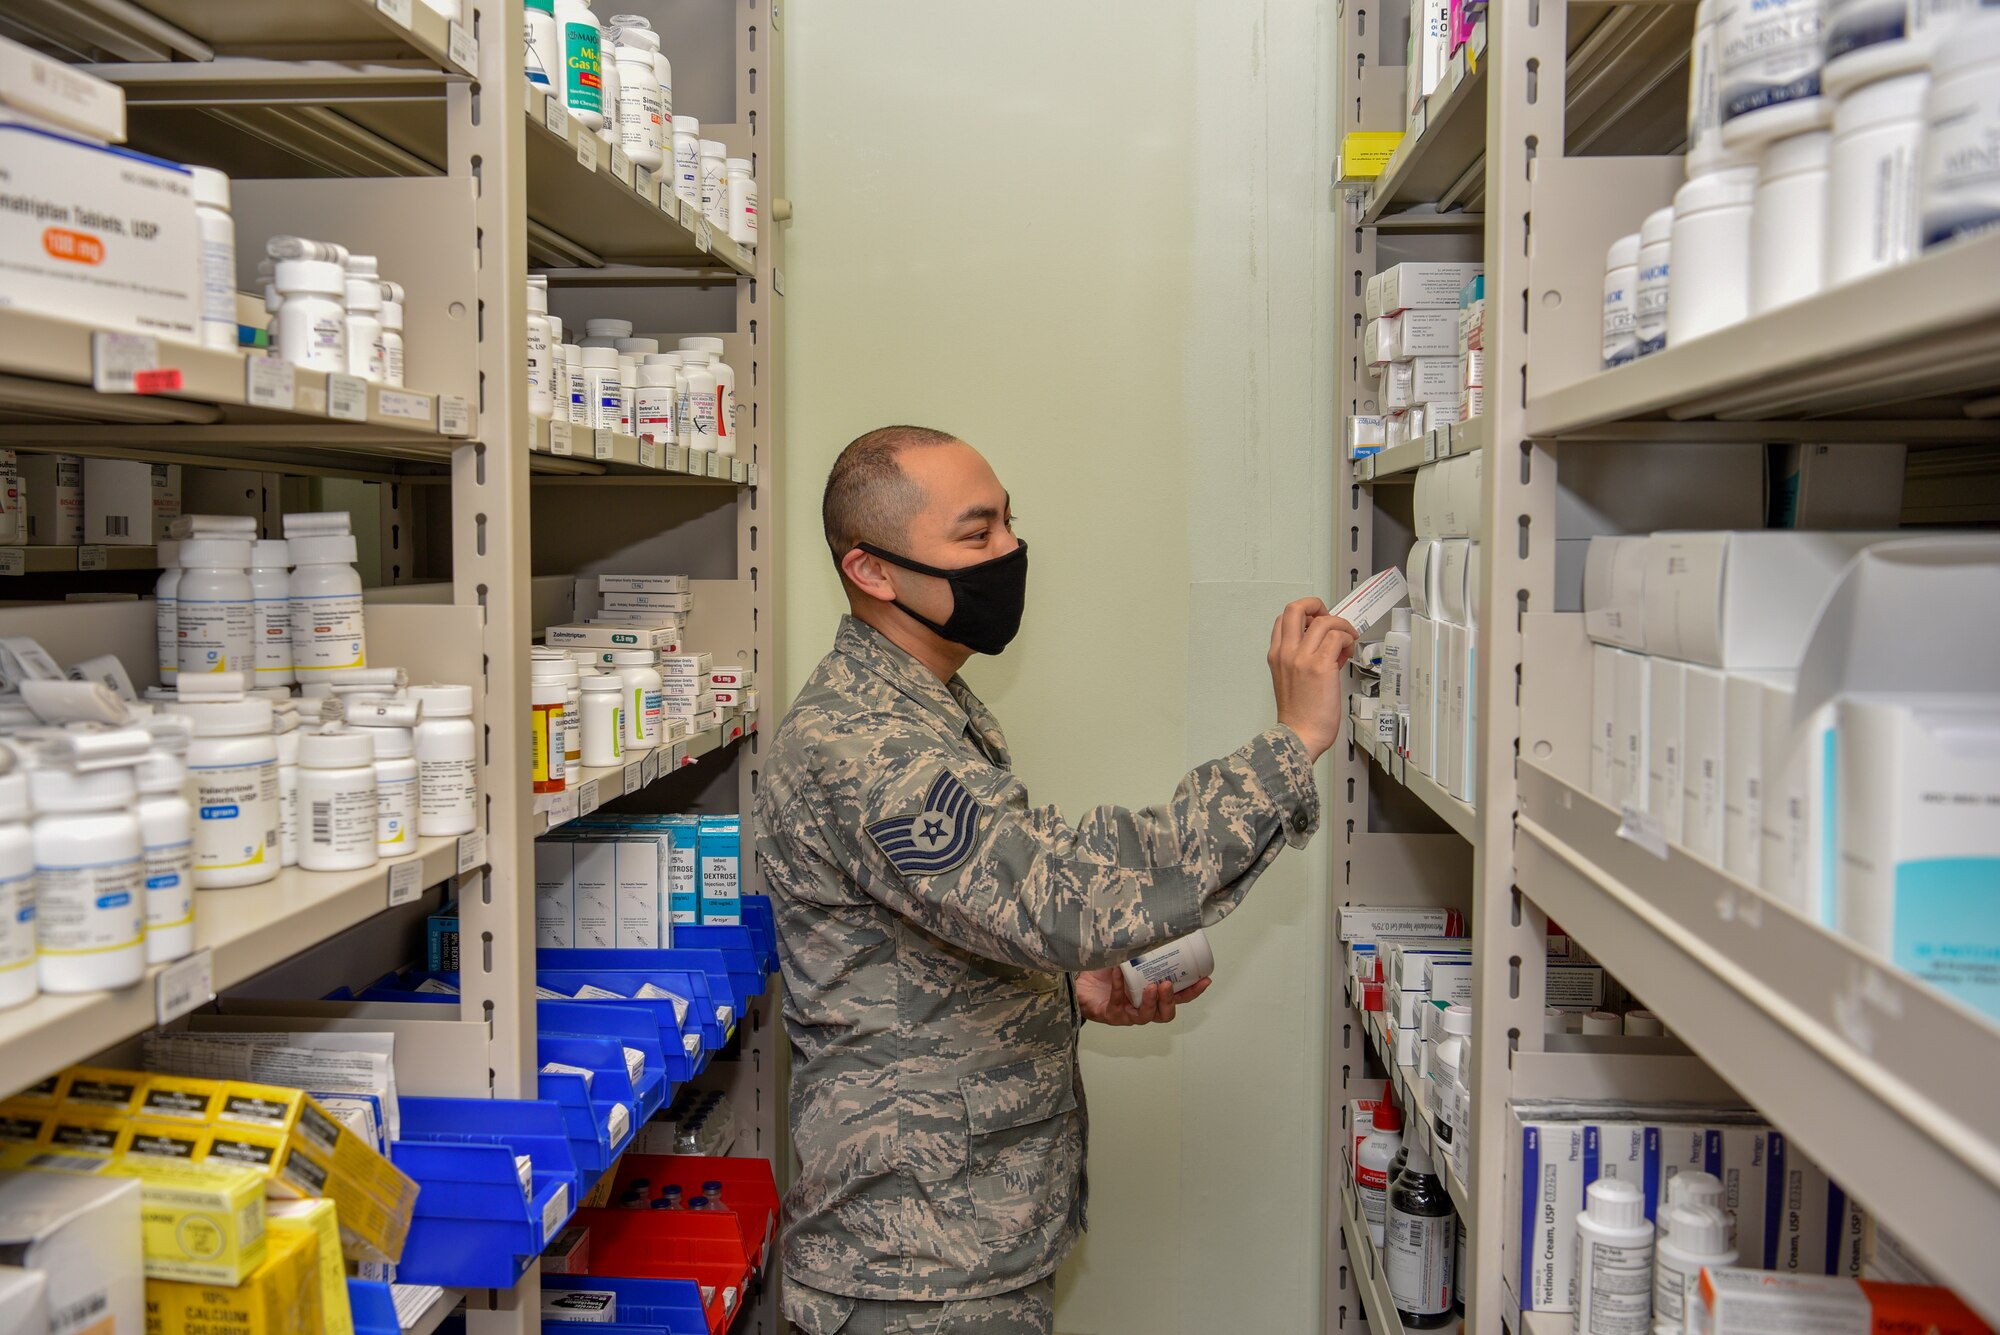 U.S. Air Force Tech. Sgt. Tyrone Rocha, 8th Medical Support Squadron NCO in charge of pharmaceutical services, checks inventory at Kunsan Air Base, Republic of Korea, May 6, 2020. The pharmacy team provides medical support to more than 2,500 members of the Wolf Pack to keep them fit to fight. (U.S. Air Force photo by Tech. Sgt. Joshua Arends)